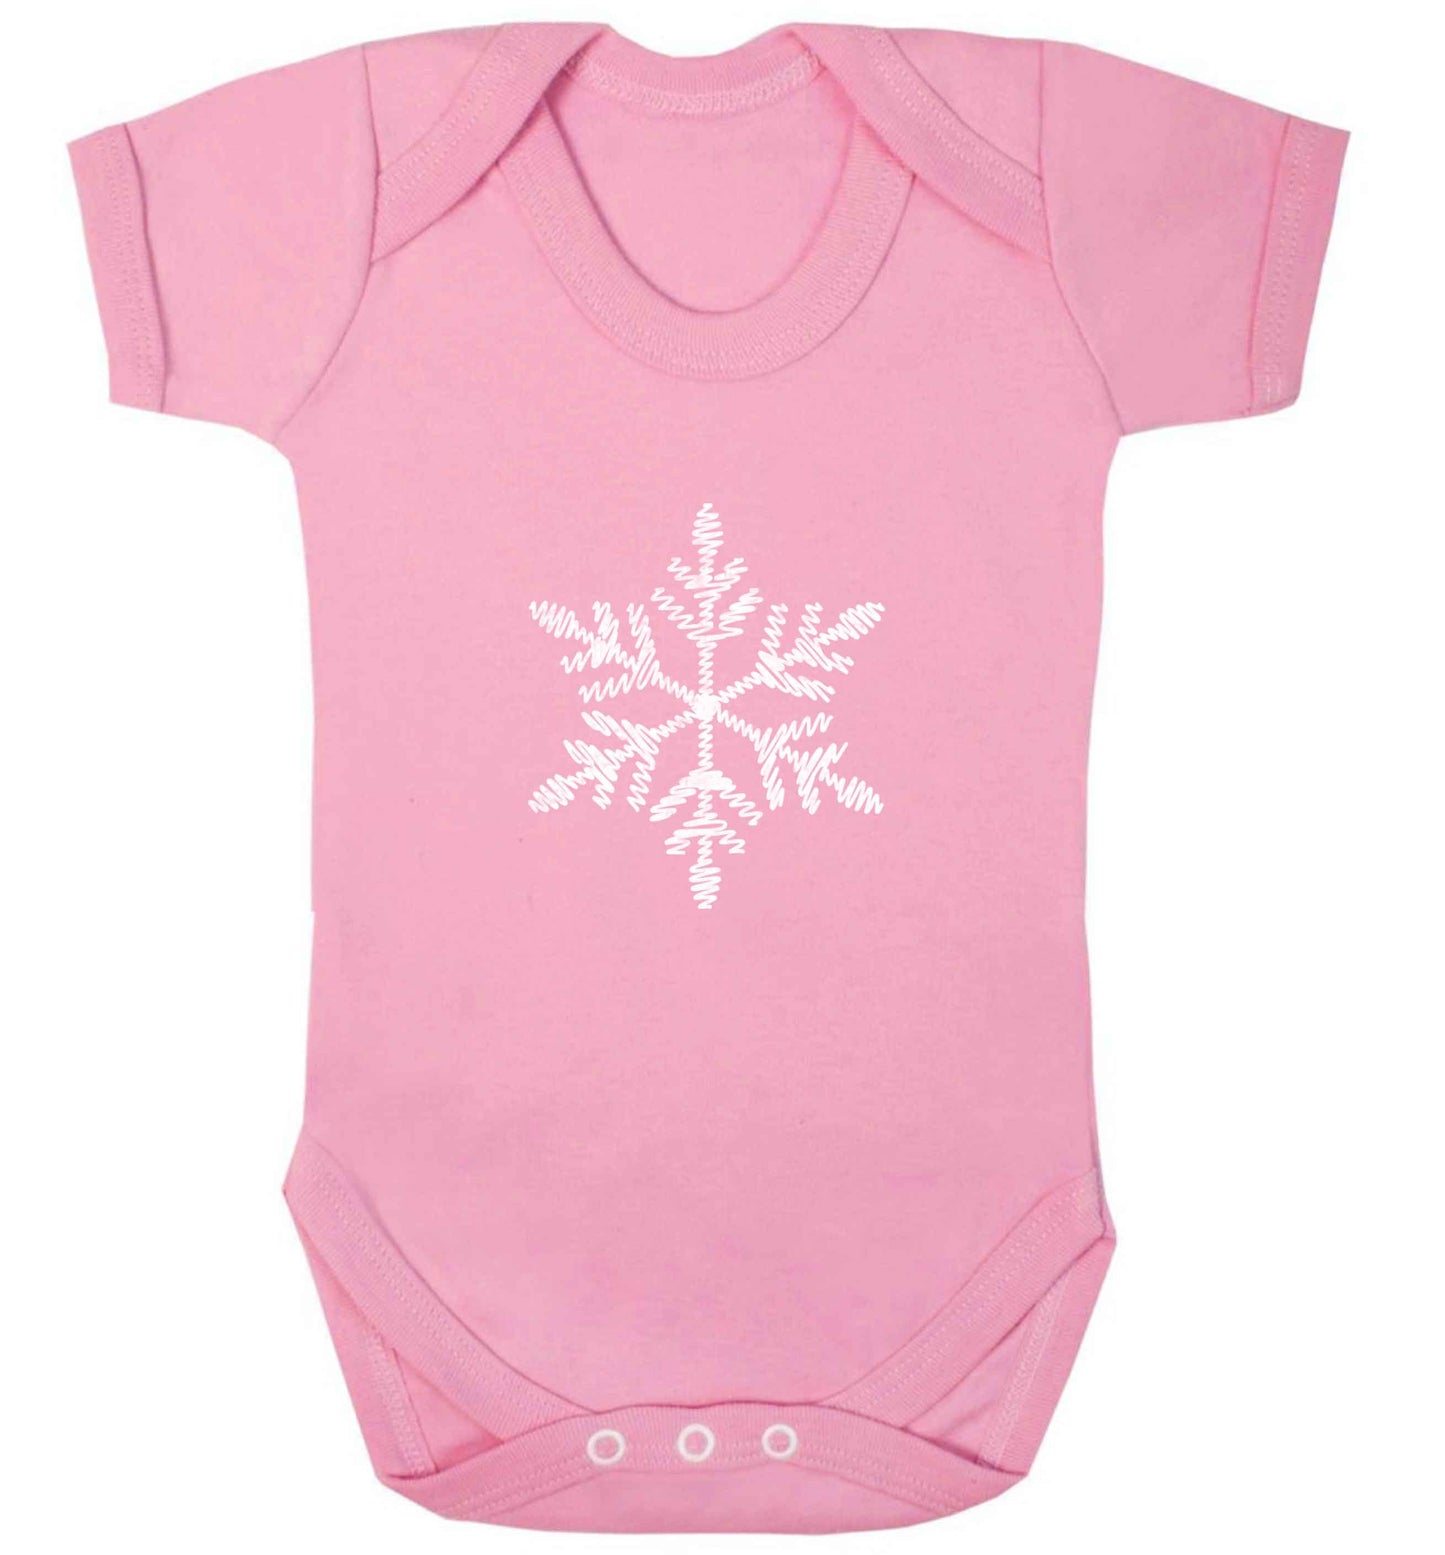 Snowflake baby vest pale pink 18-24 months